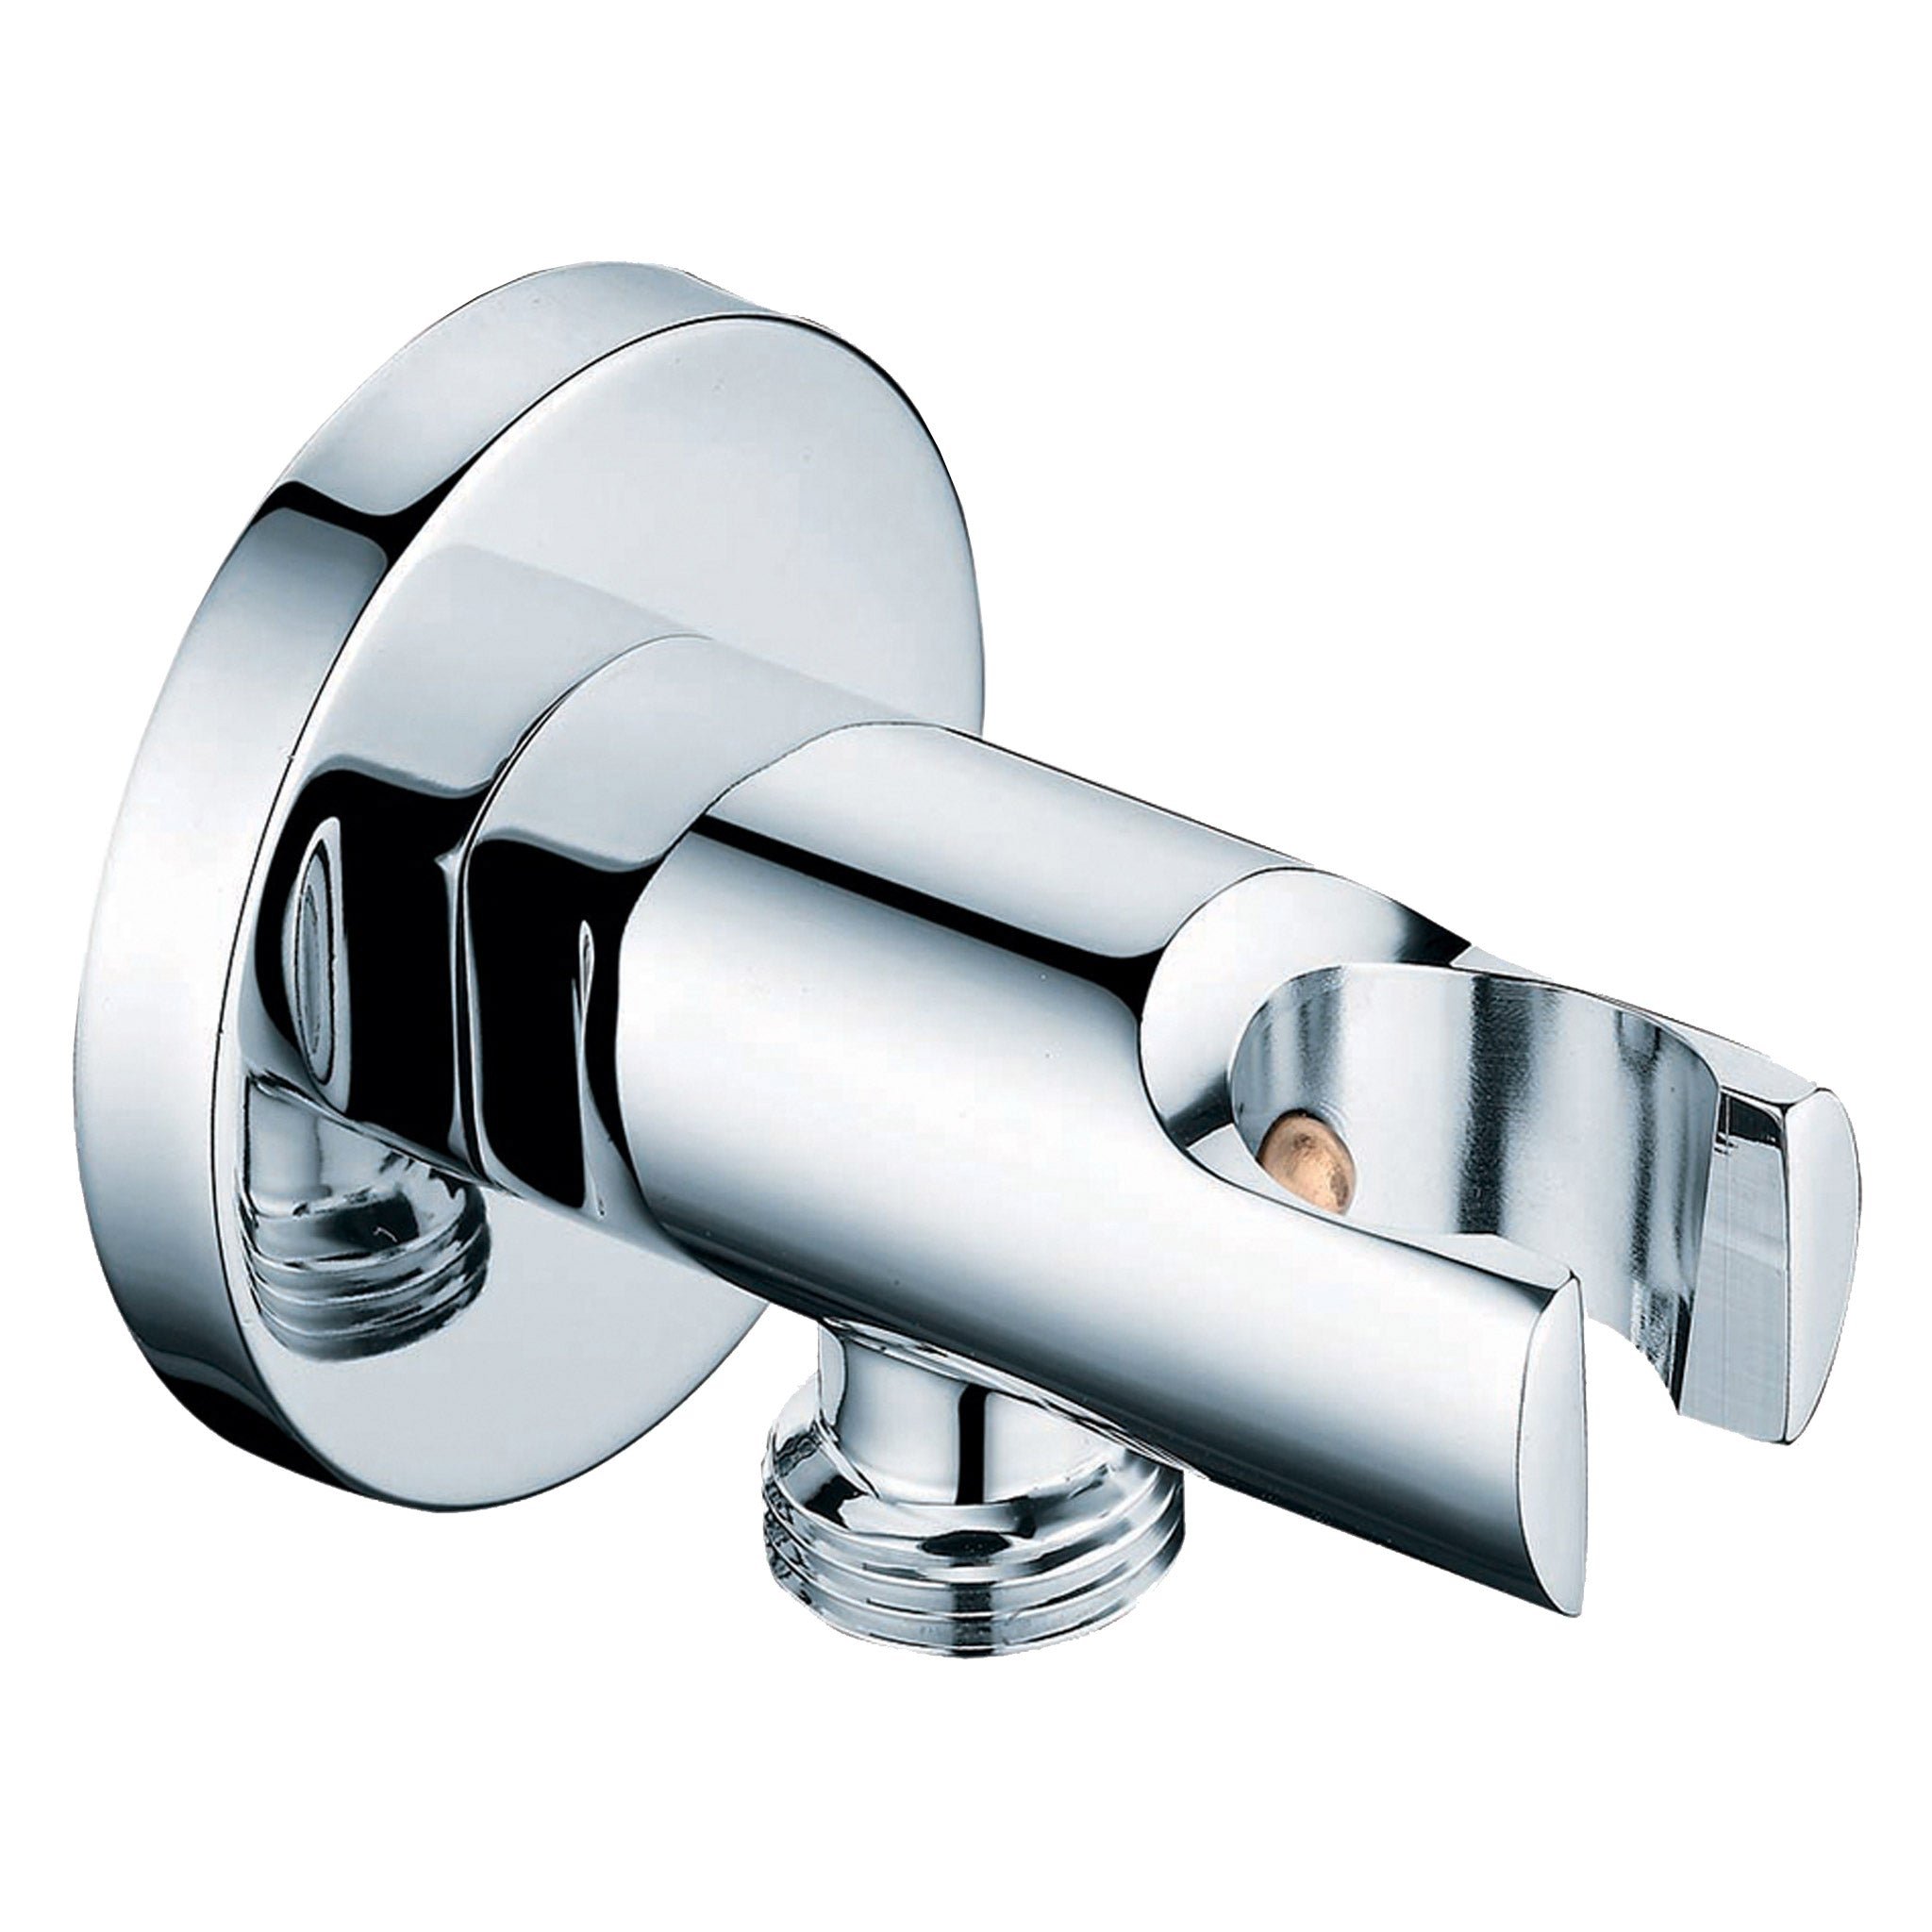 JTP Water Outlet Elbow Safety Valve For Douche